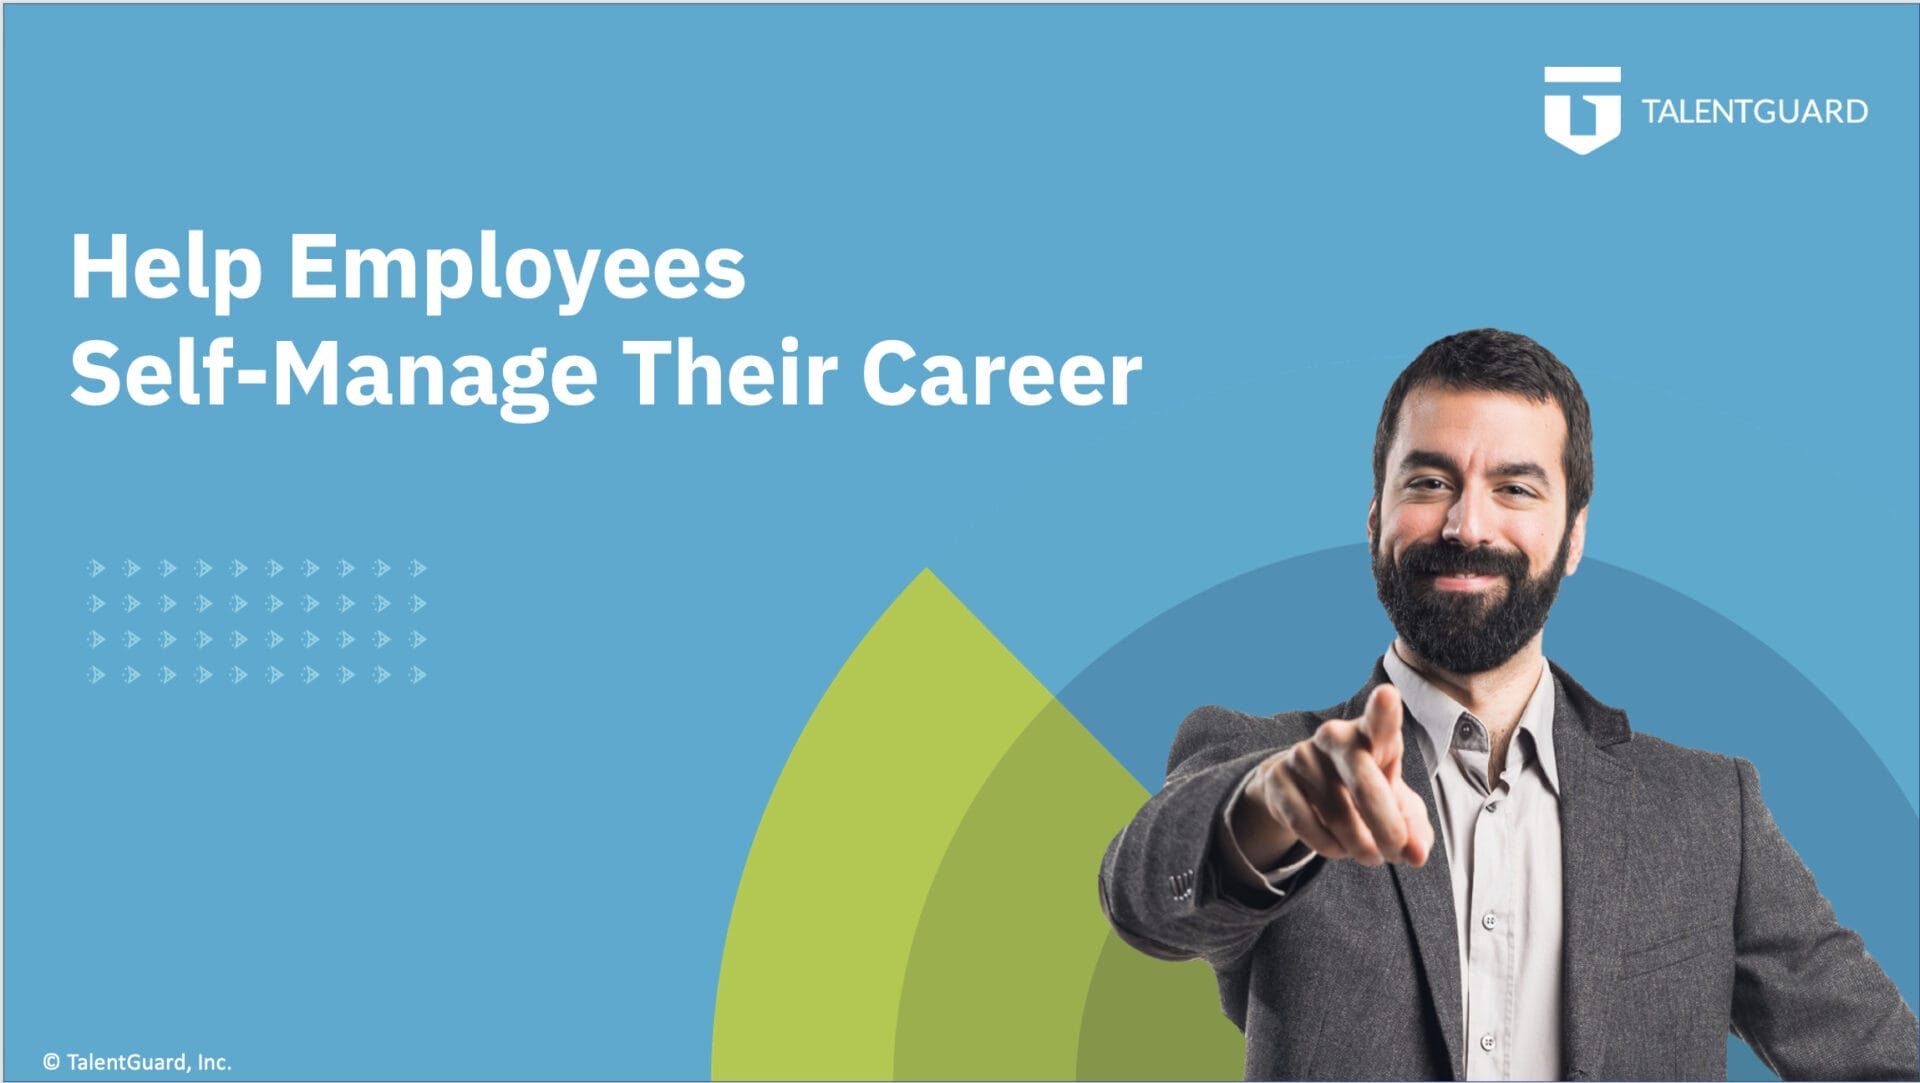 TalentGuard Help Employees Self-Manage Their Career